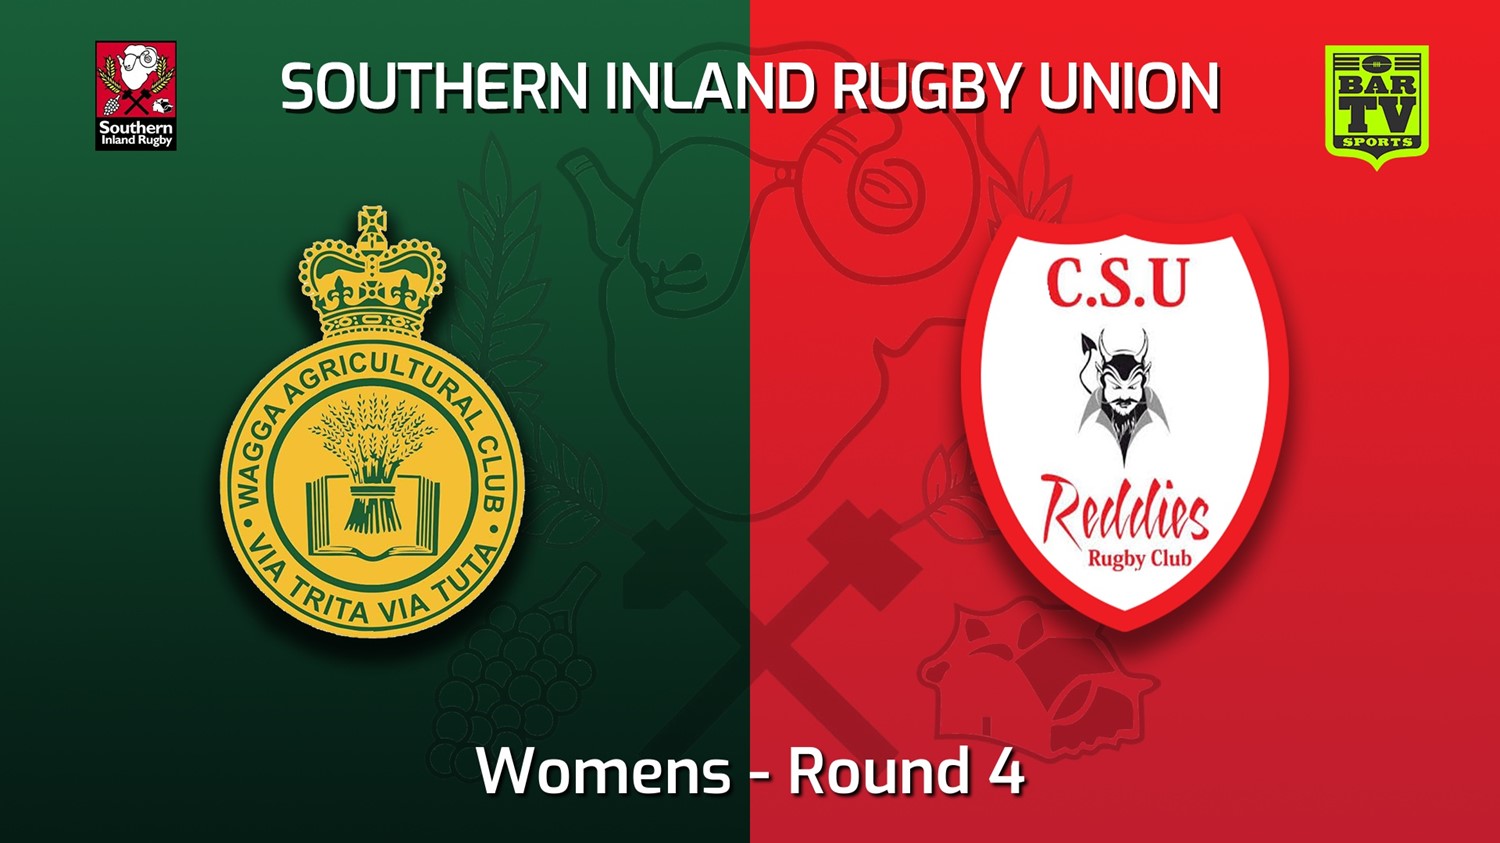 220430-Southern Inland Rugby Union Round 4 - Womens - Wagga Agricultural College v CSU Reddies Minigame Slate Image